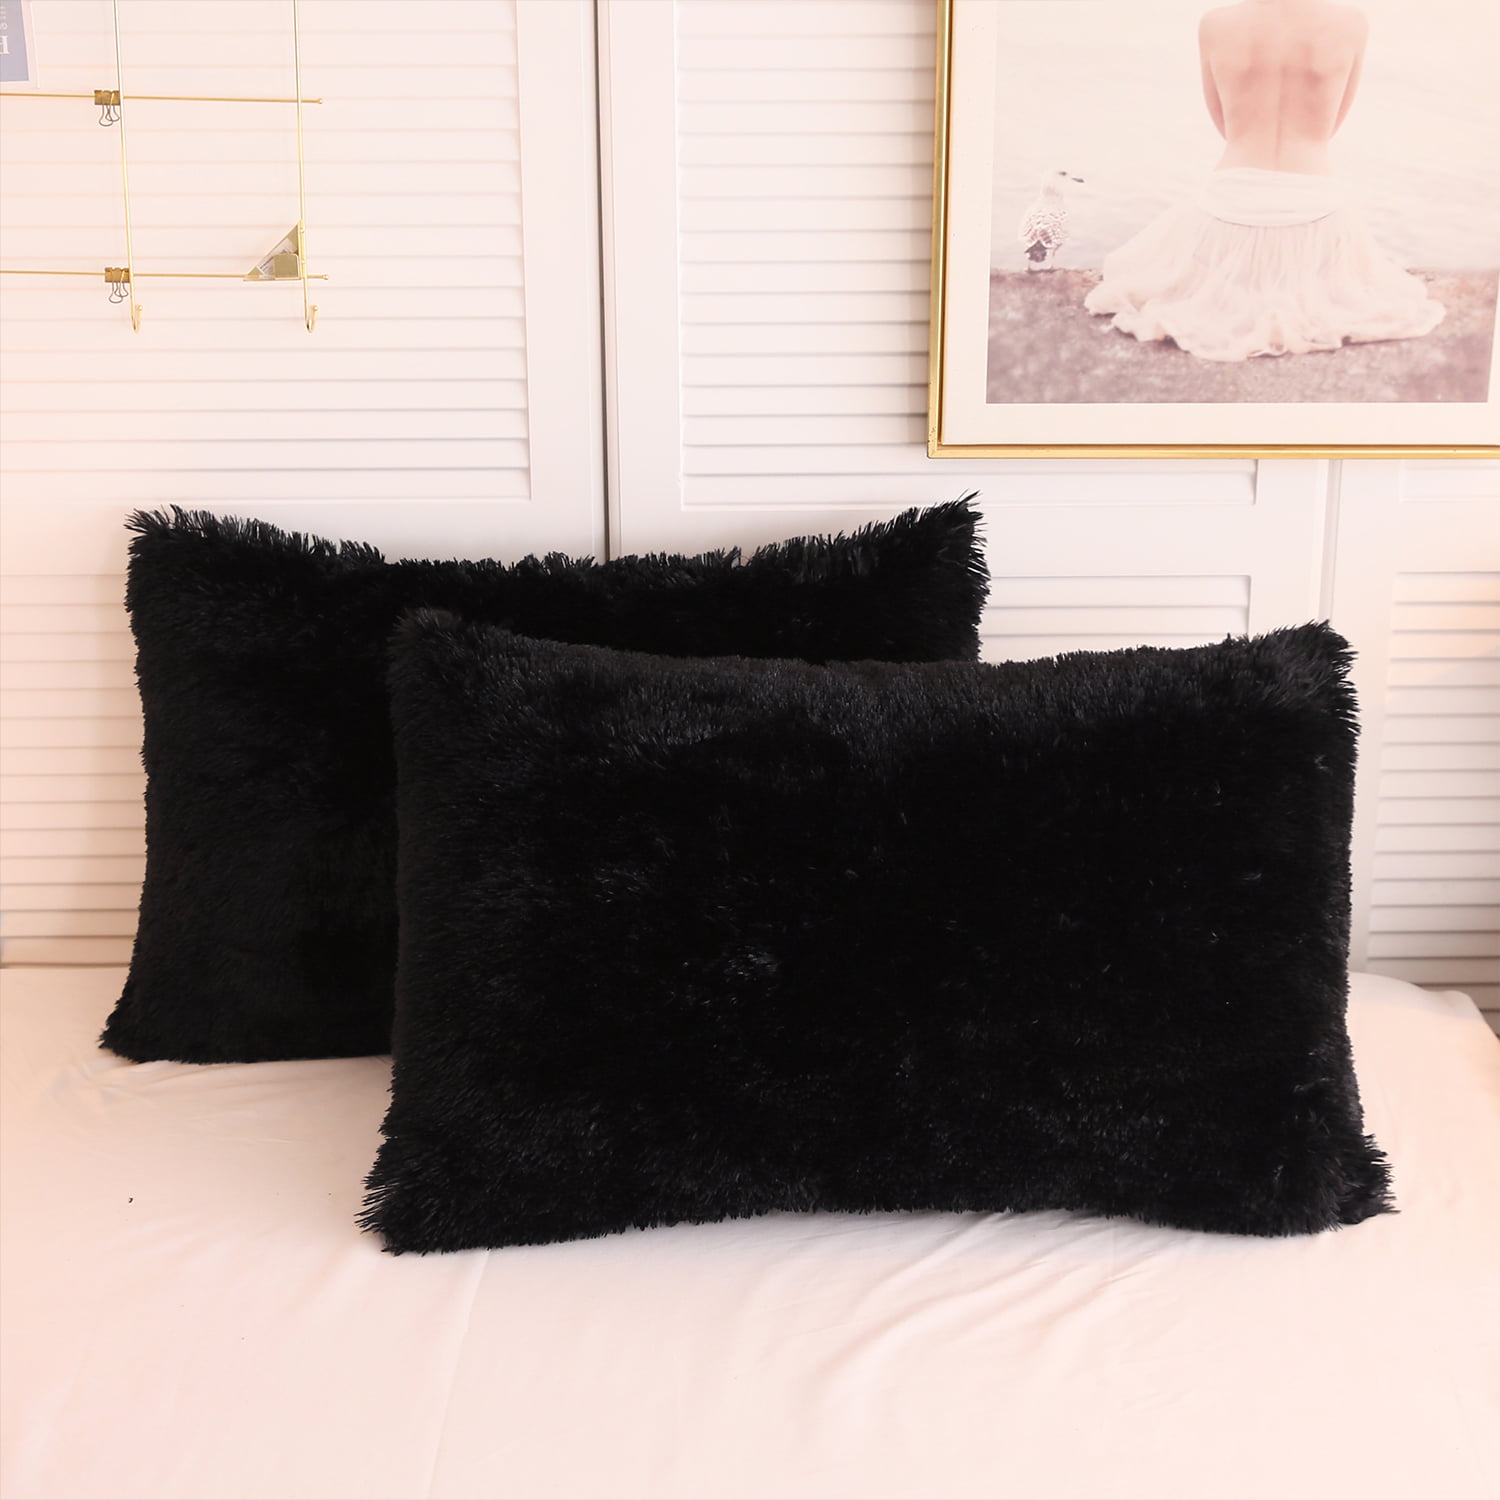  Wuuyuef Faux Fur Pillow Covers 24x24 inch Set of 2, Luxury  Super Fluffy Soft Rabbit Throw Pillow Covers,Washable Decorative Throw  Pillows for Couch Bed Bedroom Living Room,Black… : Home & Kitchen